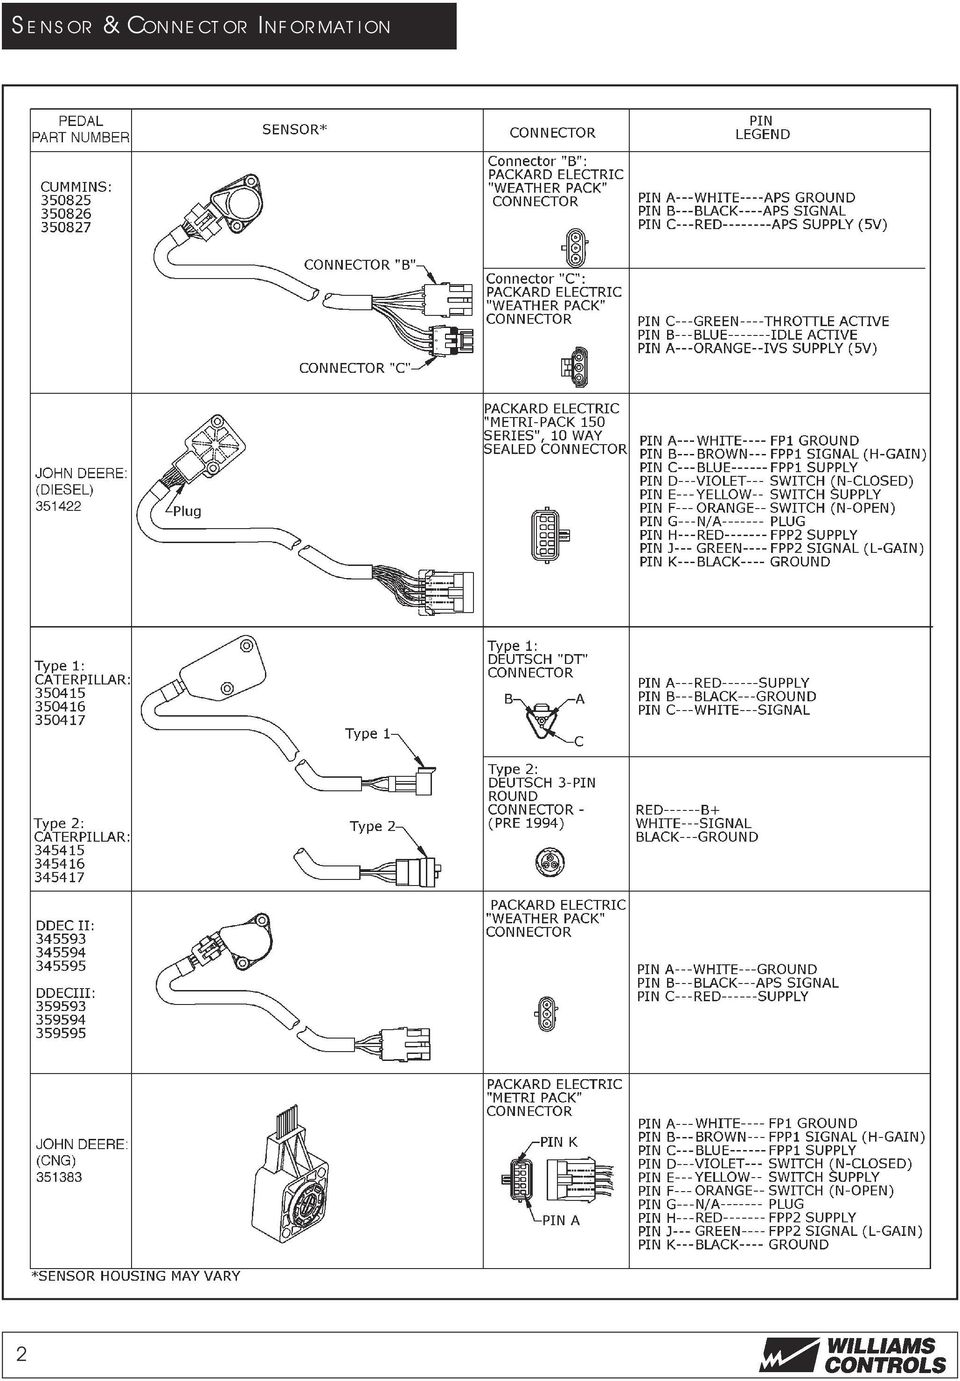 Throttle Controls for Diesel Engines - PDF Free Download Lionel E Unit Wiring Diagram DocPlayer.net